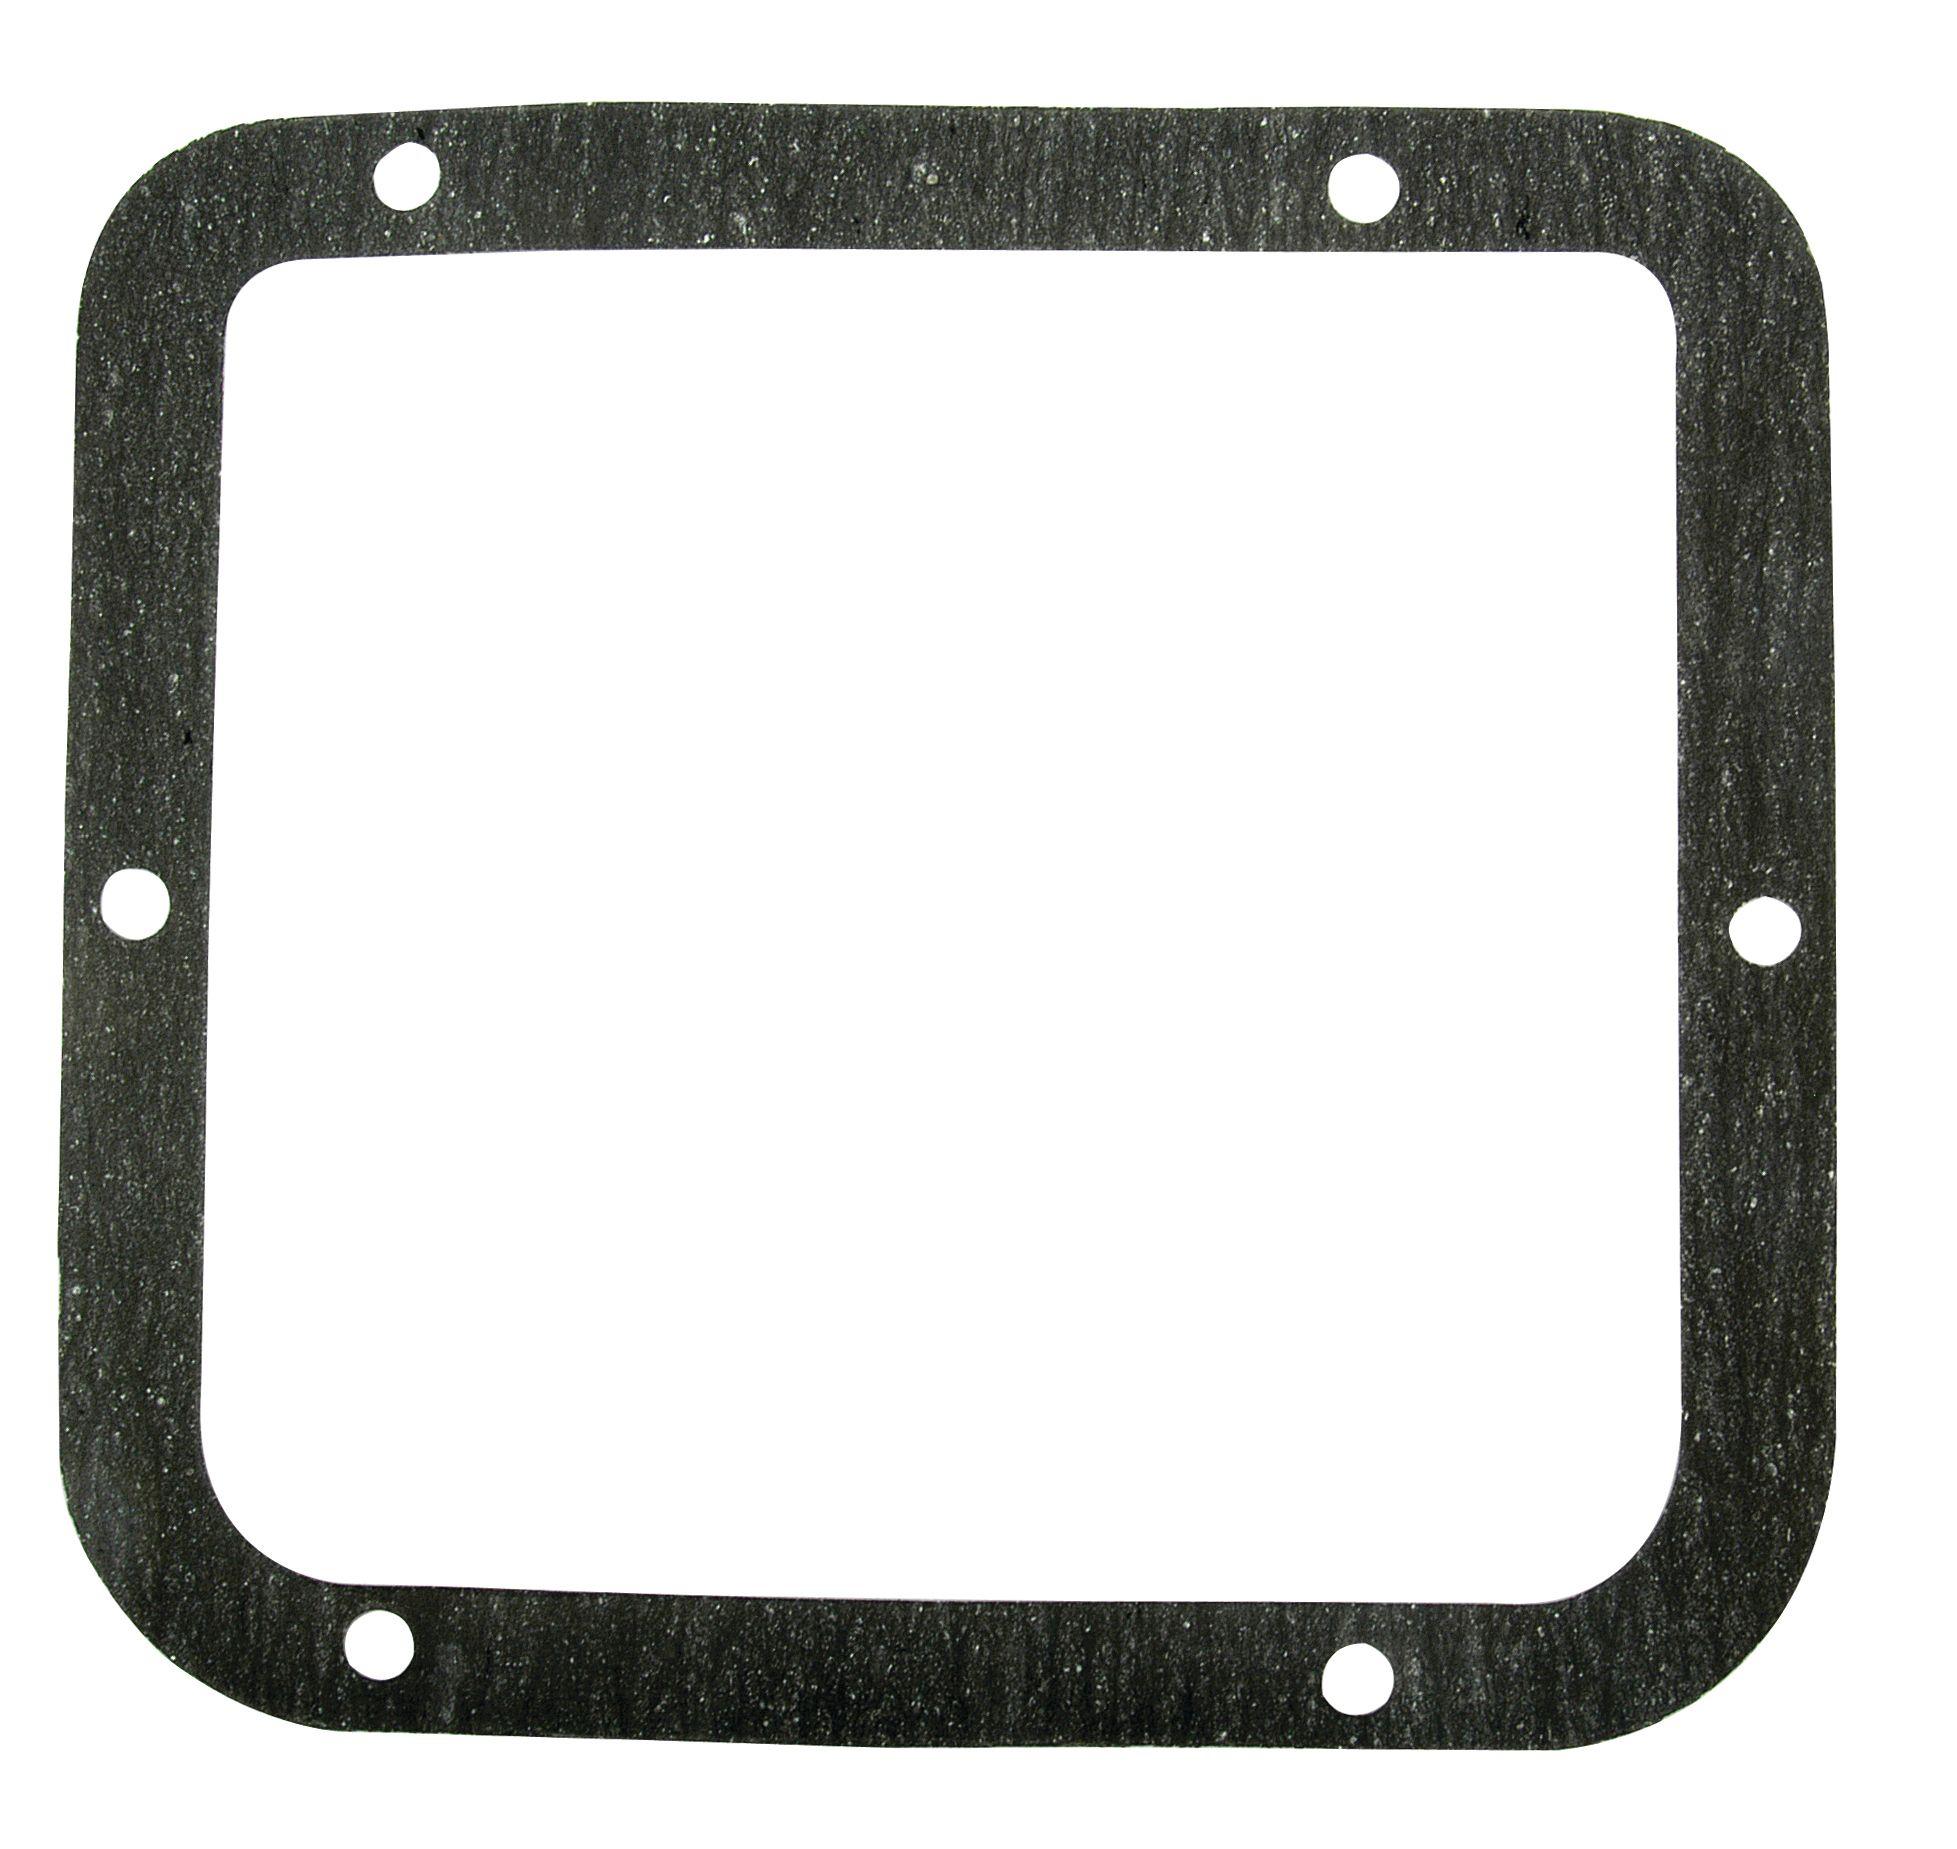 ALLIS CHALMERS GASKET-GEARSHIFT COVER 62546